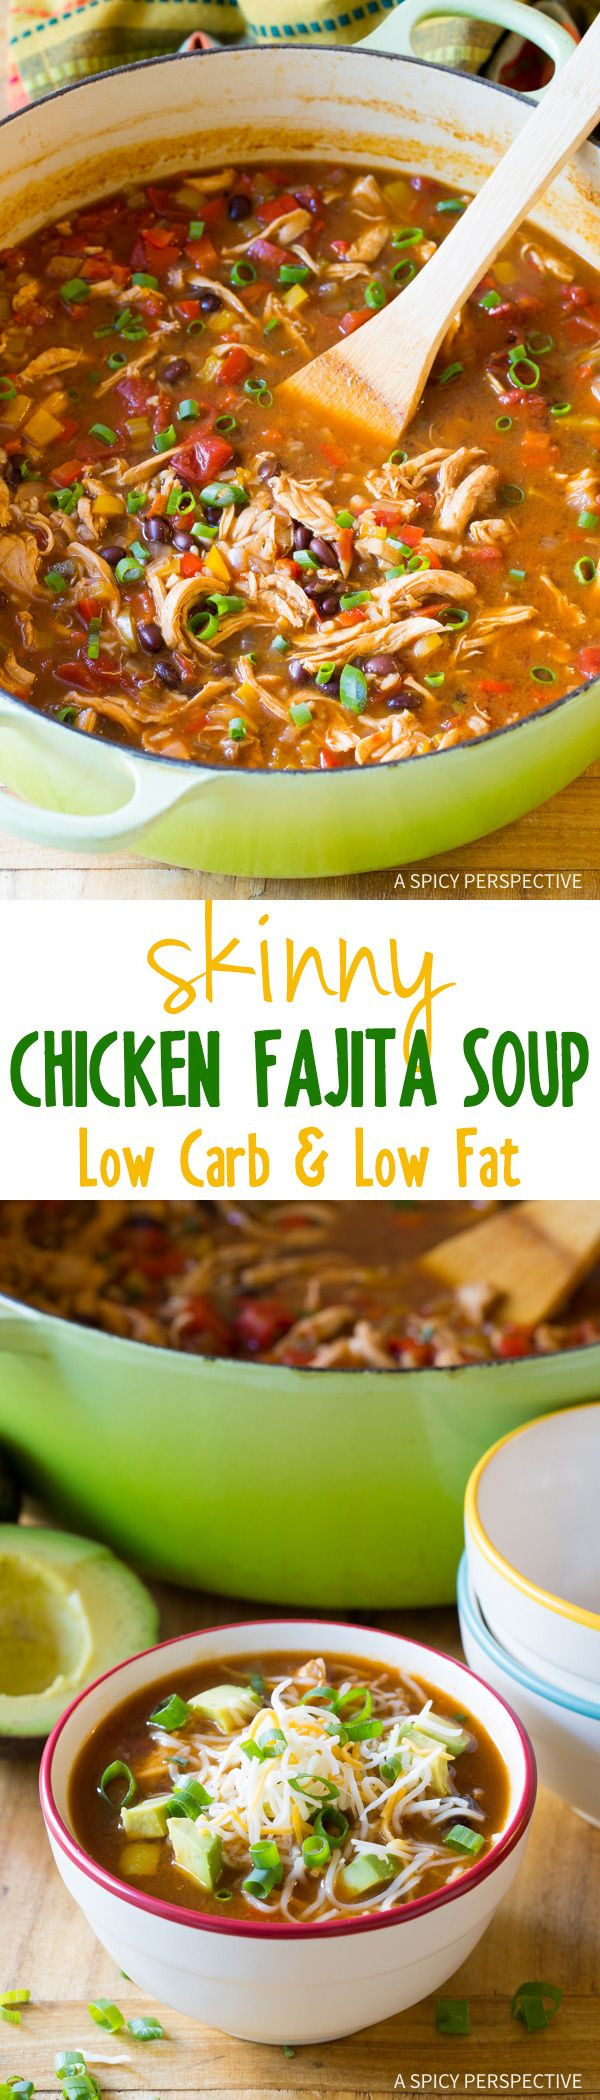 Low Carb Low Calorie Chicken Recipes
 25 best ideas about Low carb lunch on Pinterest